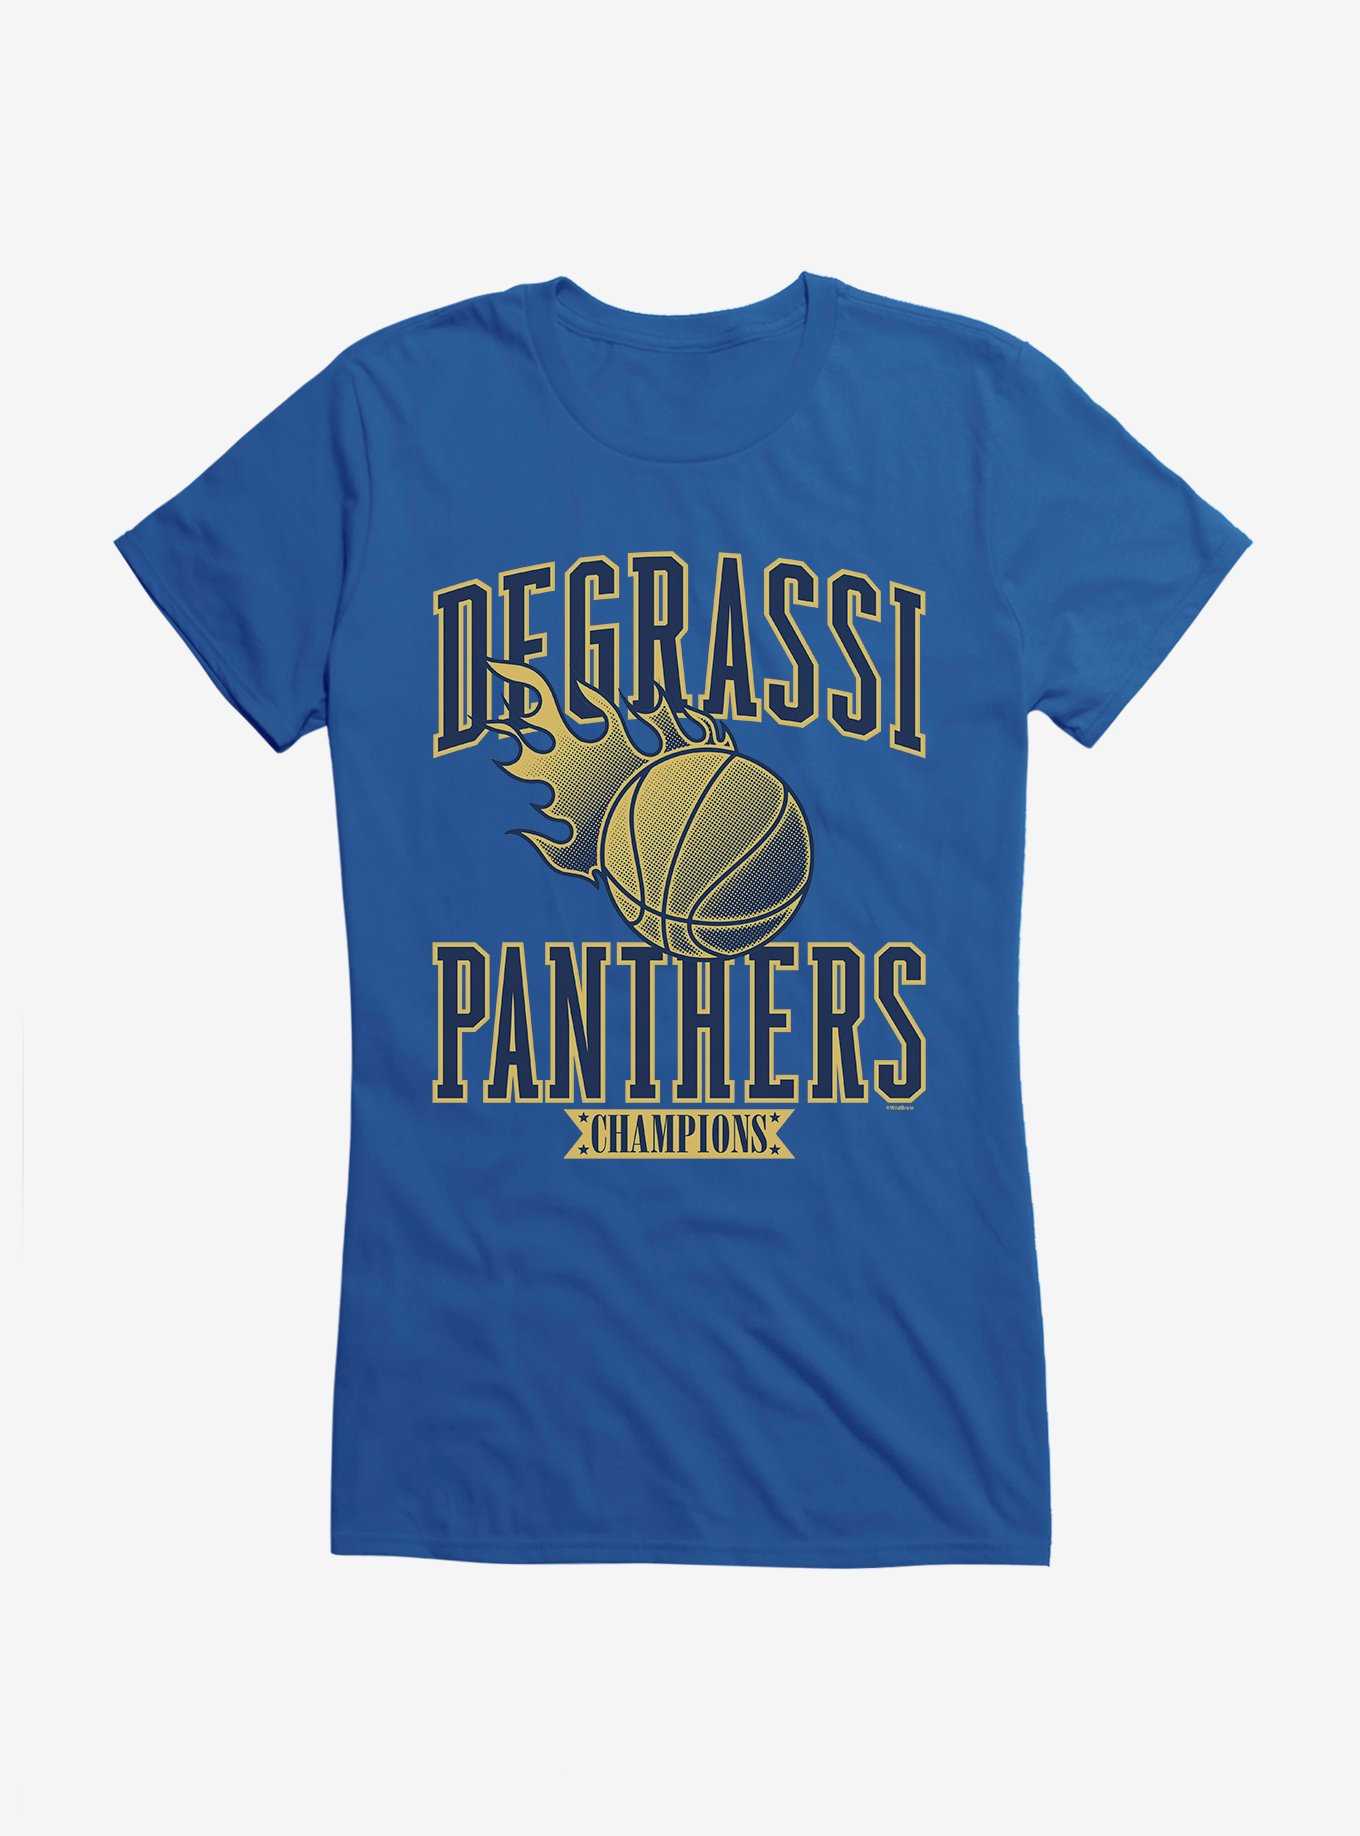 Degrassi: The Next Generation Degrassi Panthers Champions Girls T-Shirt, , hi-res